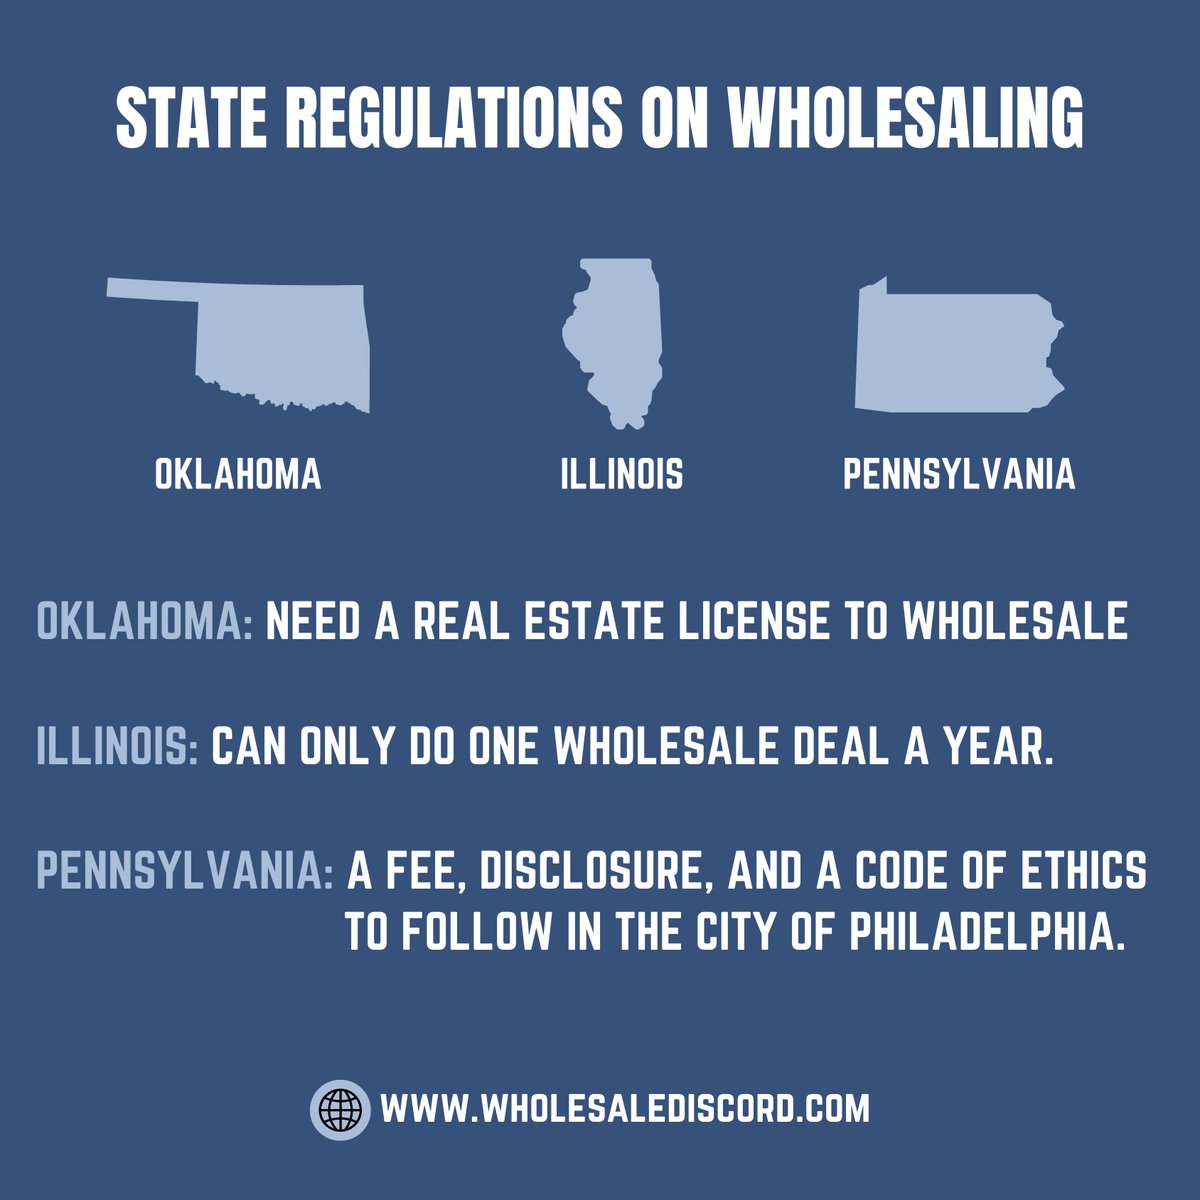 Unlock the secrets of Wholesaling Real Estate regulations state-by-state! 🗝️🏠 Stay ahead in the investment game! 💼💰 #RealEstateRegulations #StateByStateAnalysis #PropertyInvestment #RealEstateInsights #MarketResearch #PropertyLaws #InvestorTips #RealEstateKnowledge